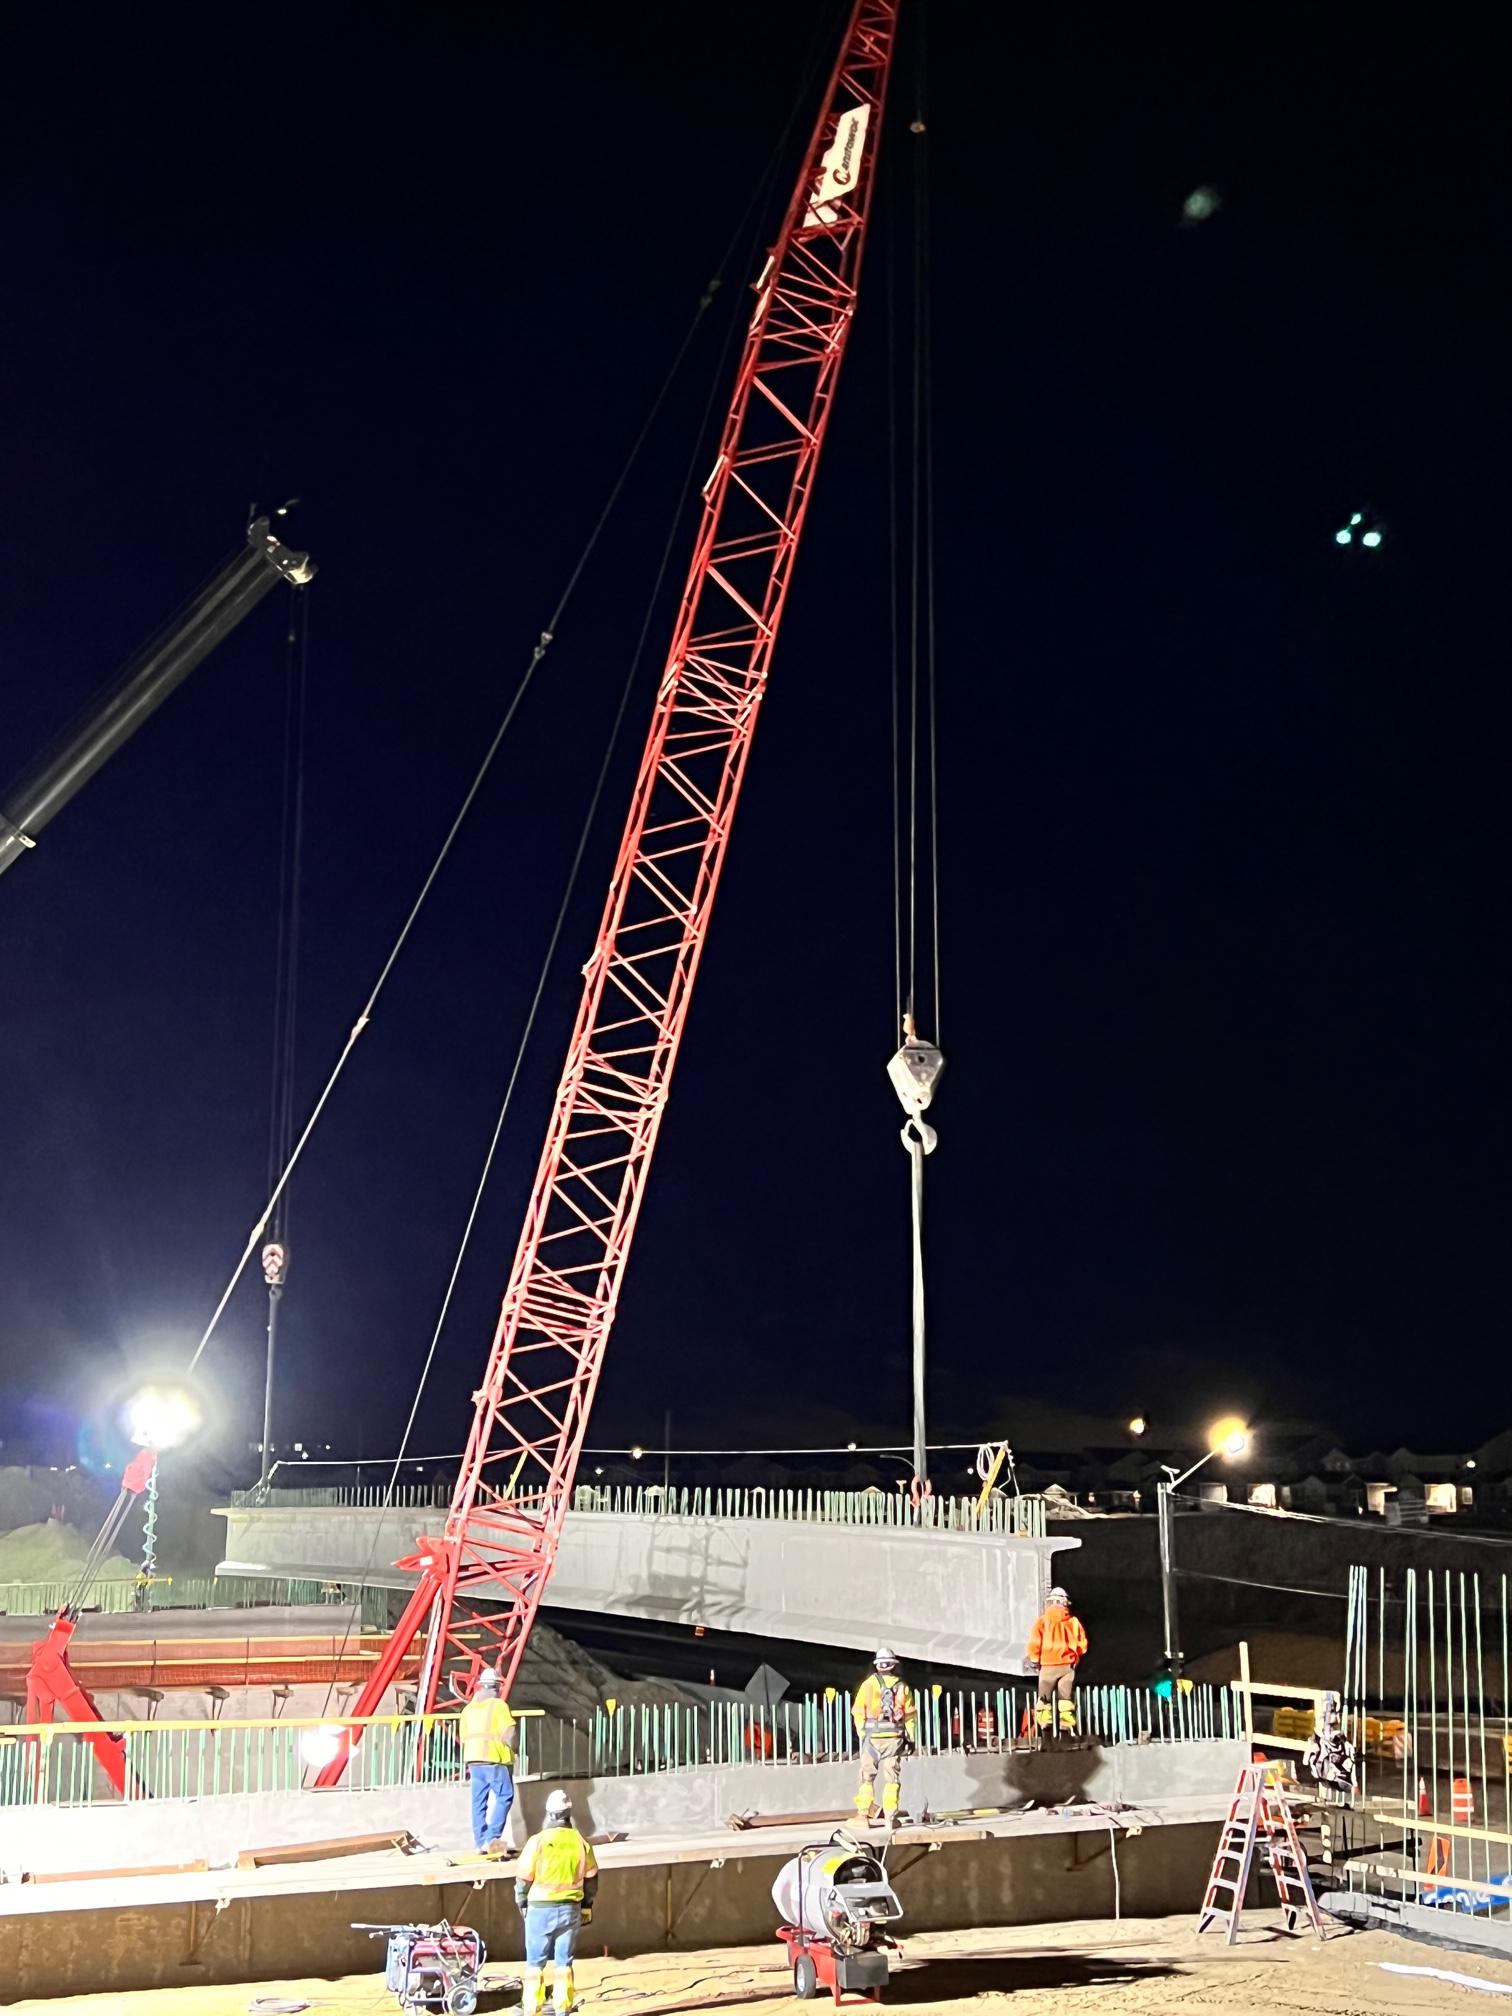 Cranes setting the girders over Reserach Parkway for new bridge construction.jpg detail image